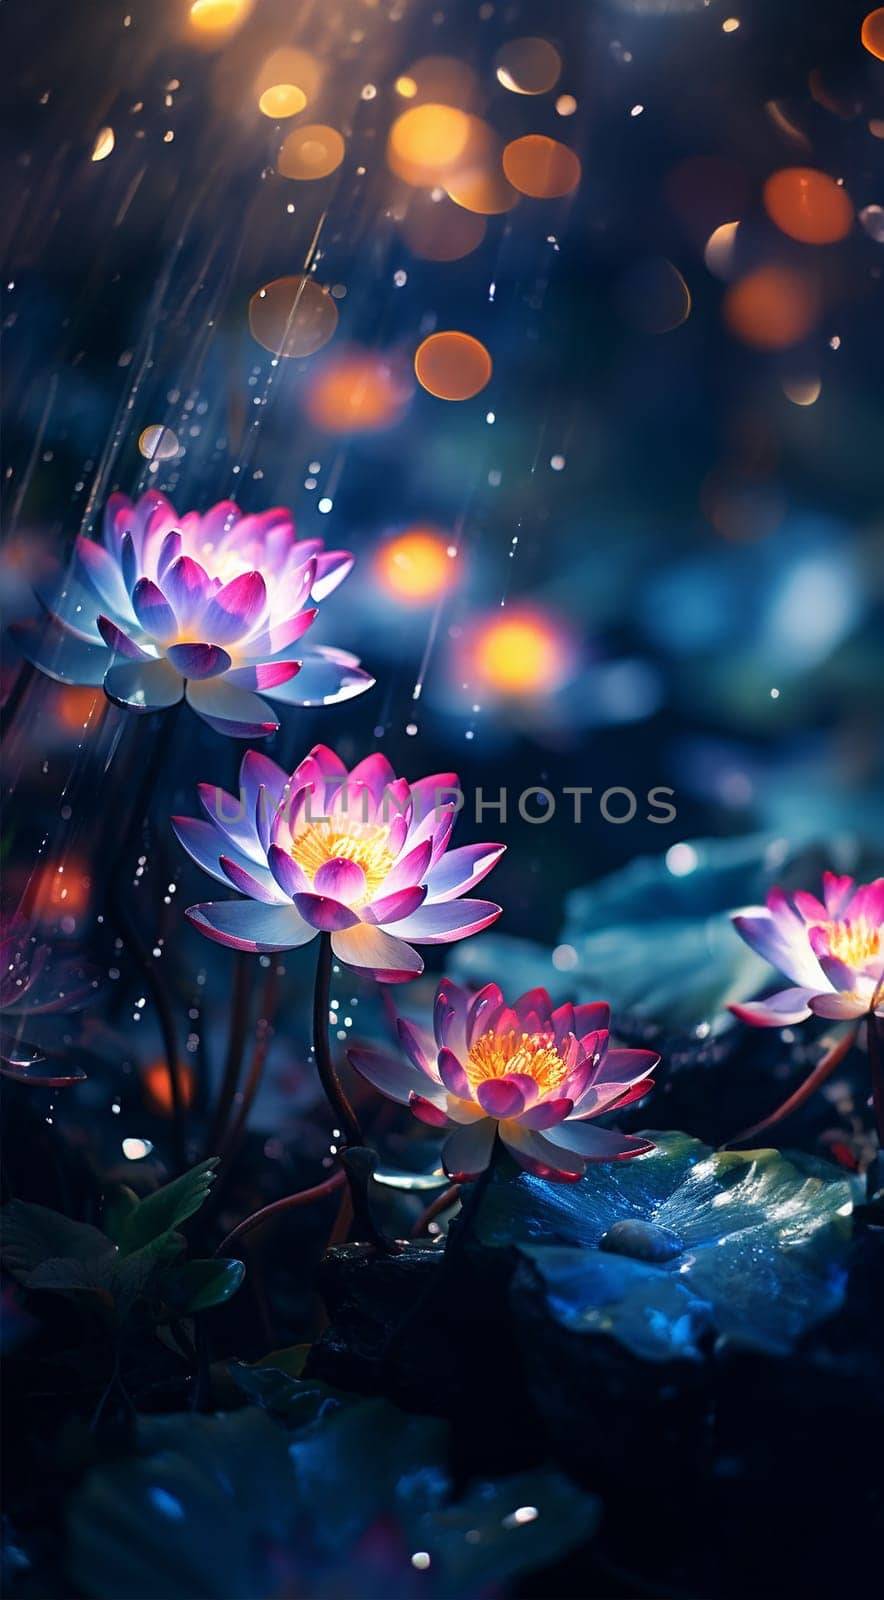 Magical pink water lily by night, lotus flower Orange Sunset in the garden pond. Close-up of Nymphaea reflected in water. Flower landscape for nature wallpaper. Vertical background copy space. Sparkling bokeh lights. Lotus flower magic by Annebel146